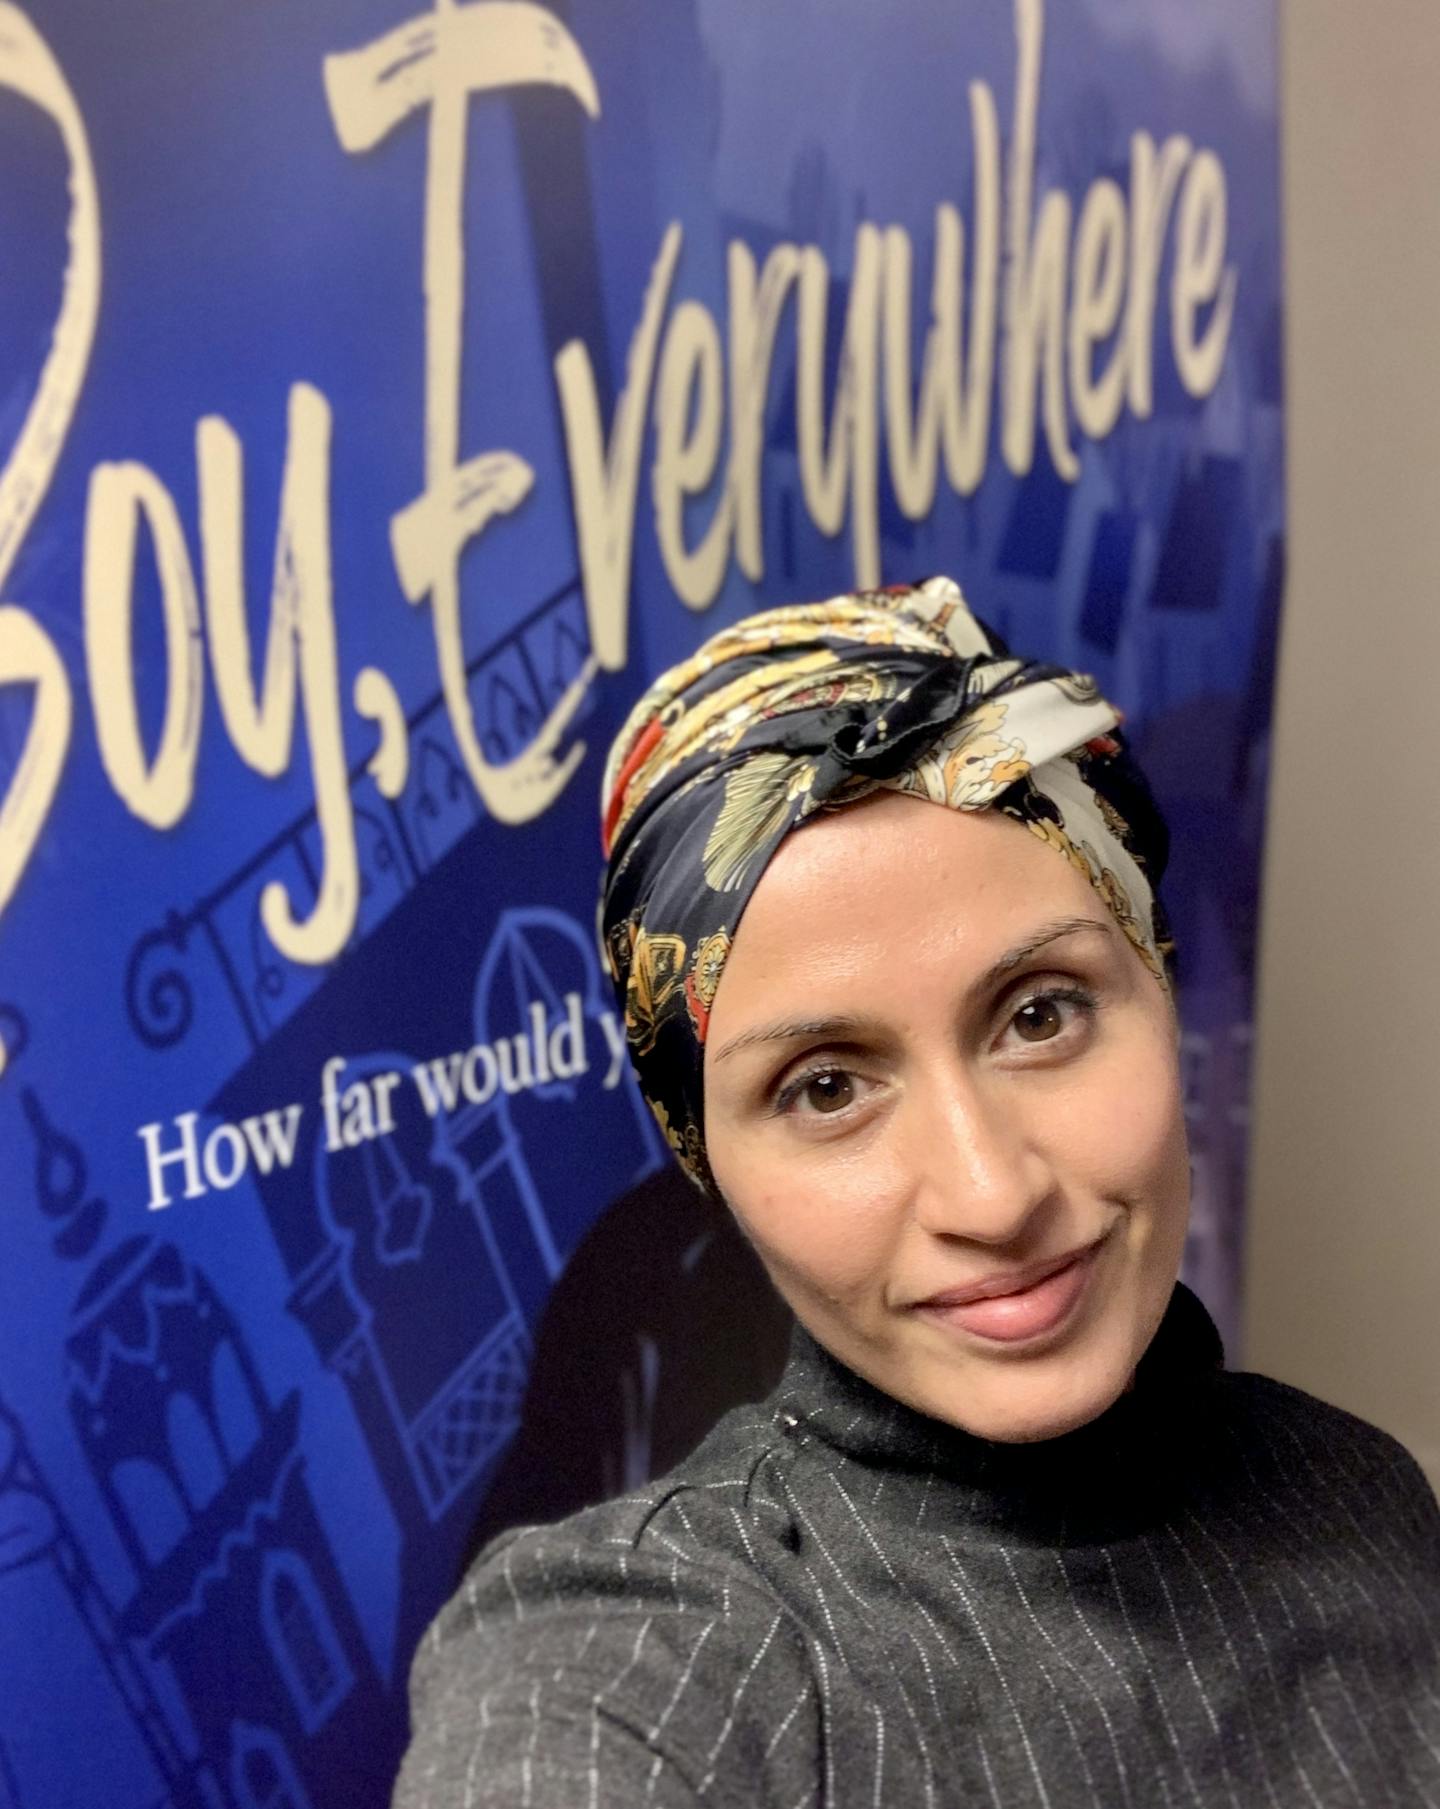 A. M. Dassu, a mixed South Asian woman, is standing in front of a blue banner of her book \nBoy, Everywhere\n, smiling. She is wearing a black pinstripe, high neck top and a black, cream and red patterned satin scarf worn as a head wrap.